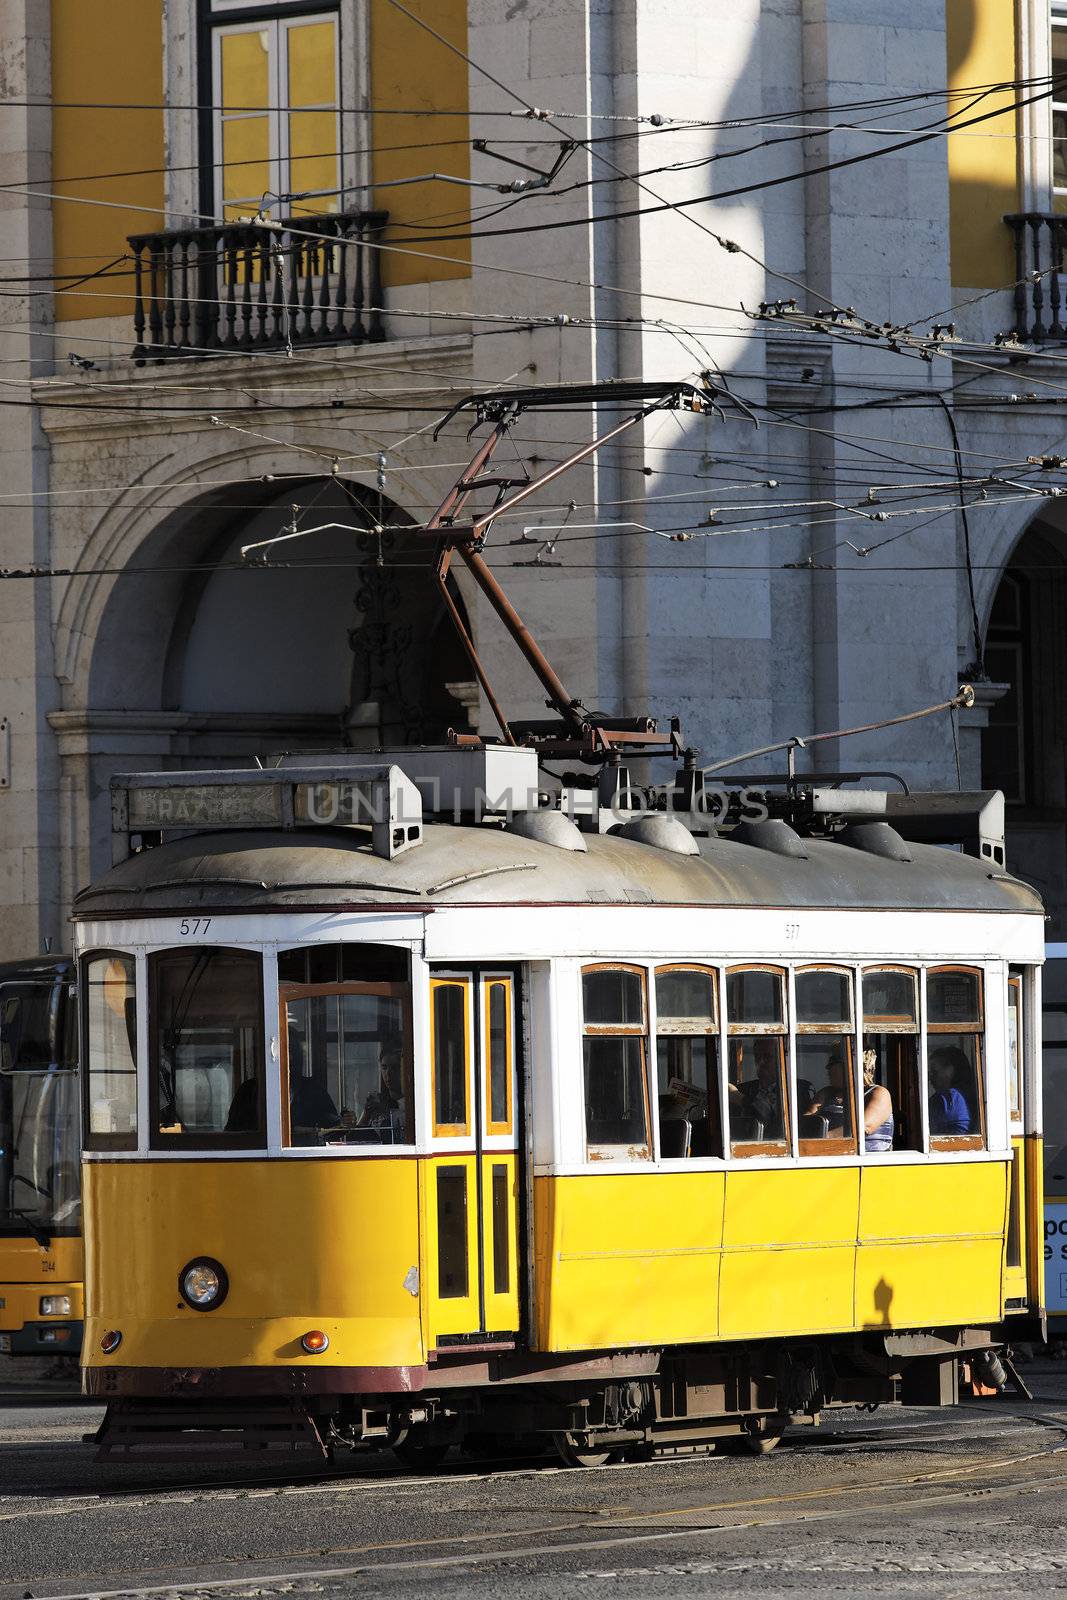 Typical yellow Tram by vwalakte